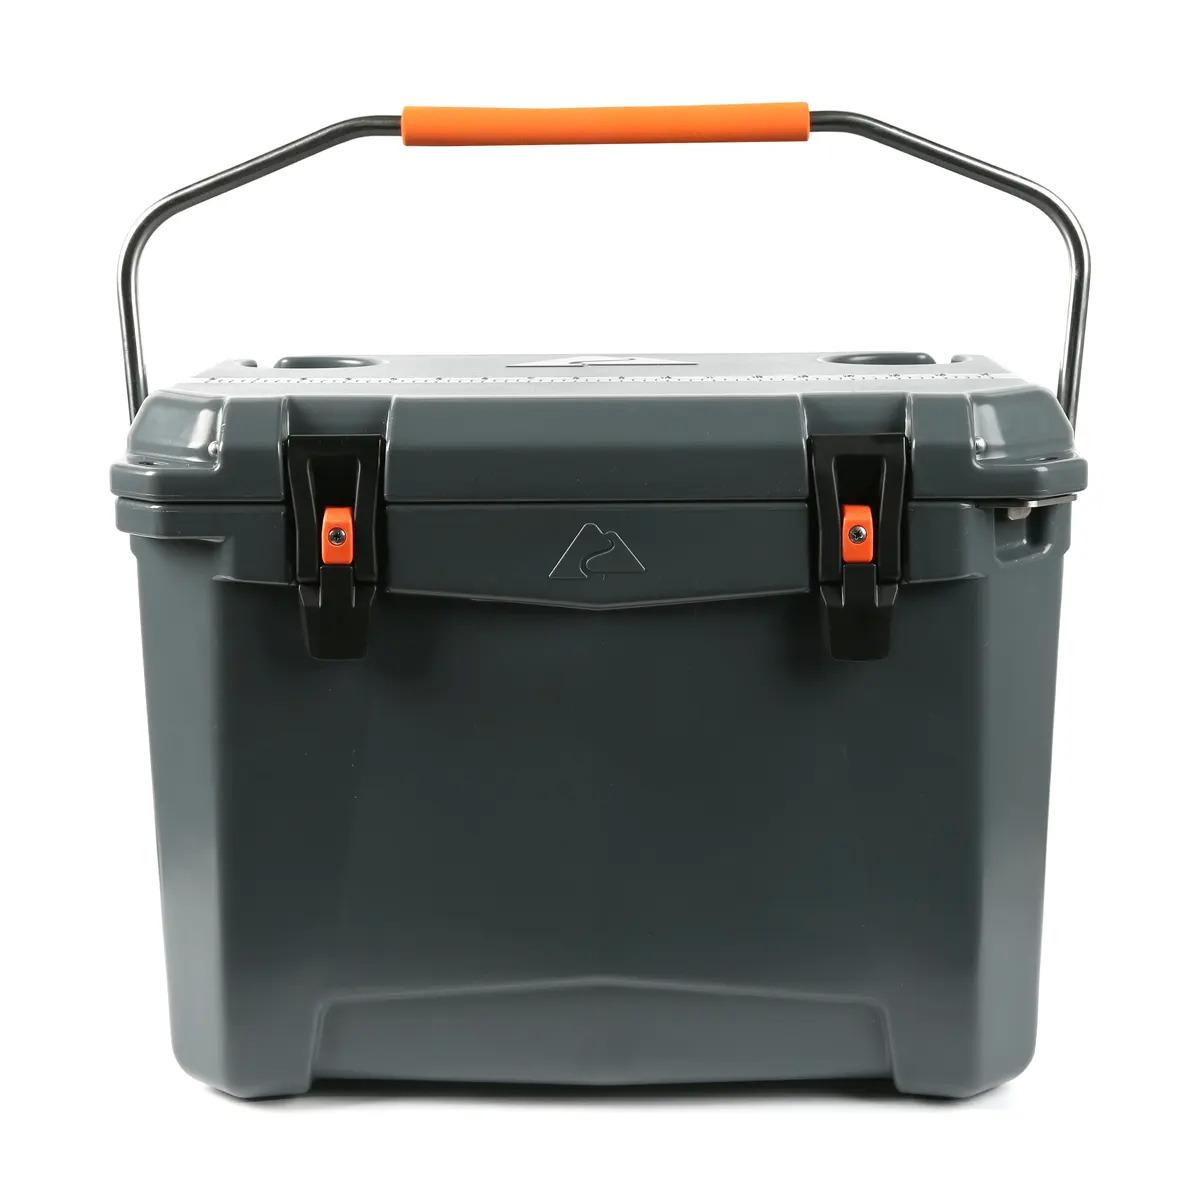 Ozark Trail 26Q Roto-Molded Cooler with Microban for $49 Shipped